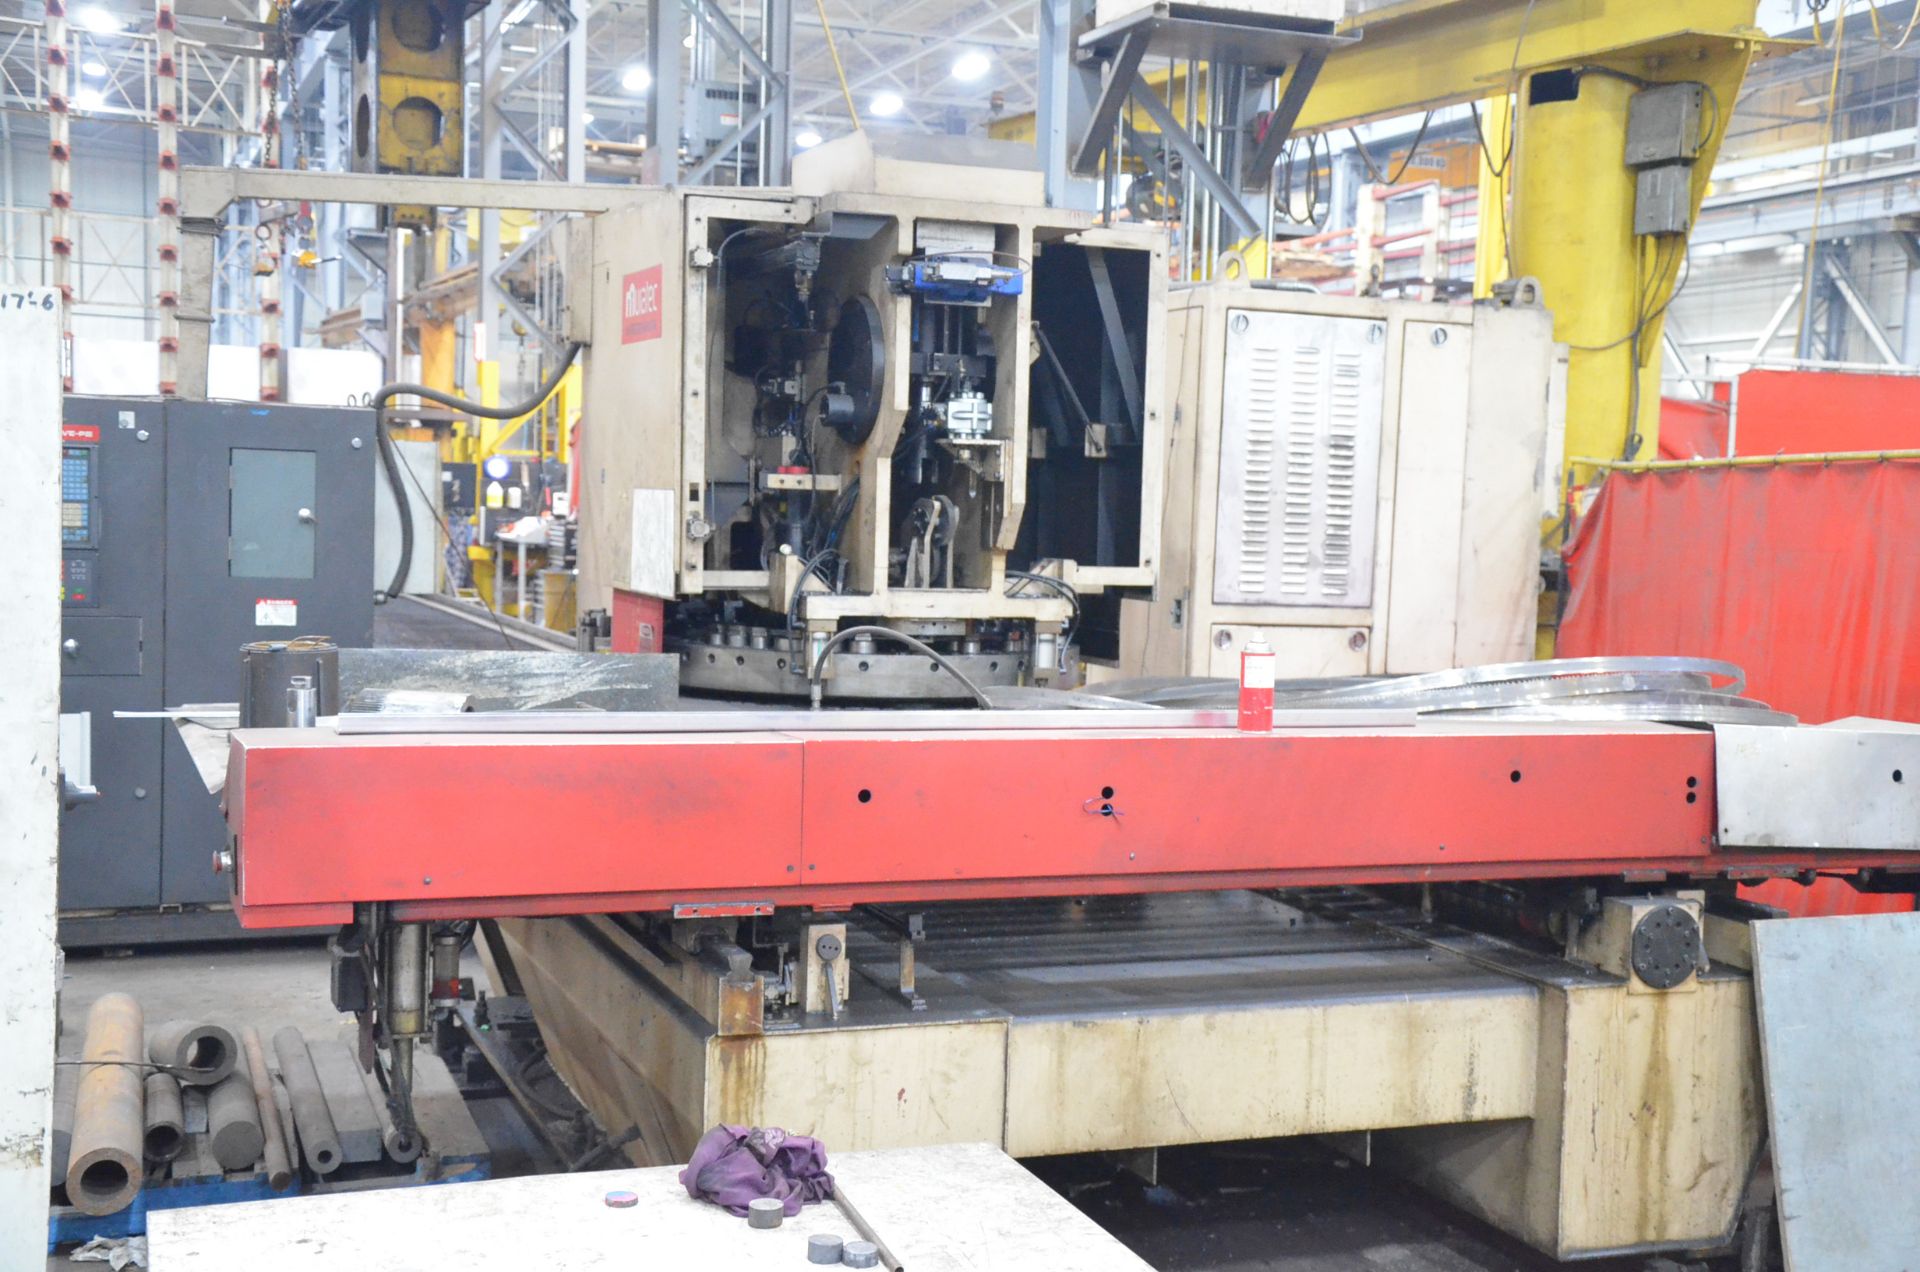 WIEDEMAN MURATECH VECTRUM 500 M-5 P4834 CNC TURRET PUNCH WITH FANUC OO-P CNC CONTROL, 52 STATION